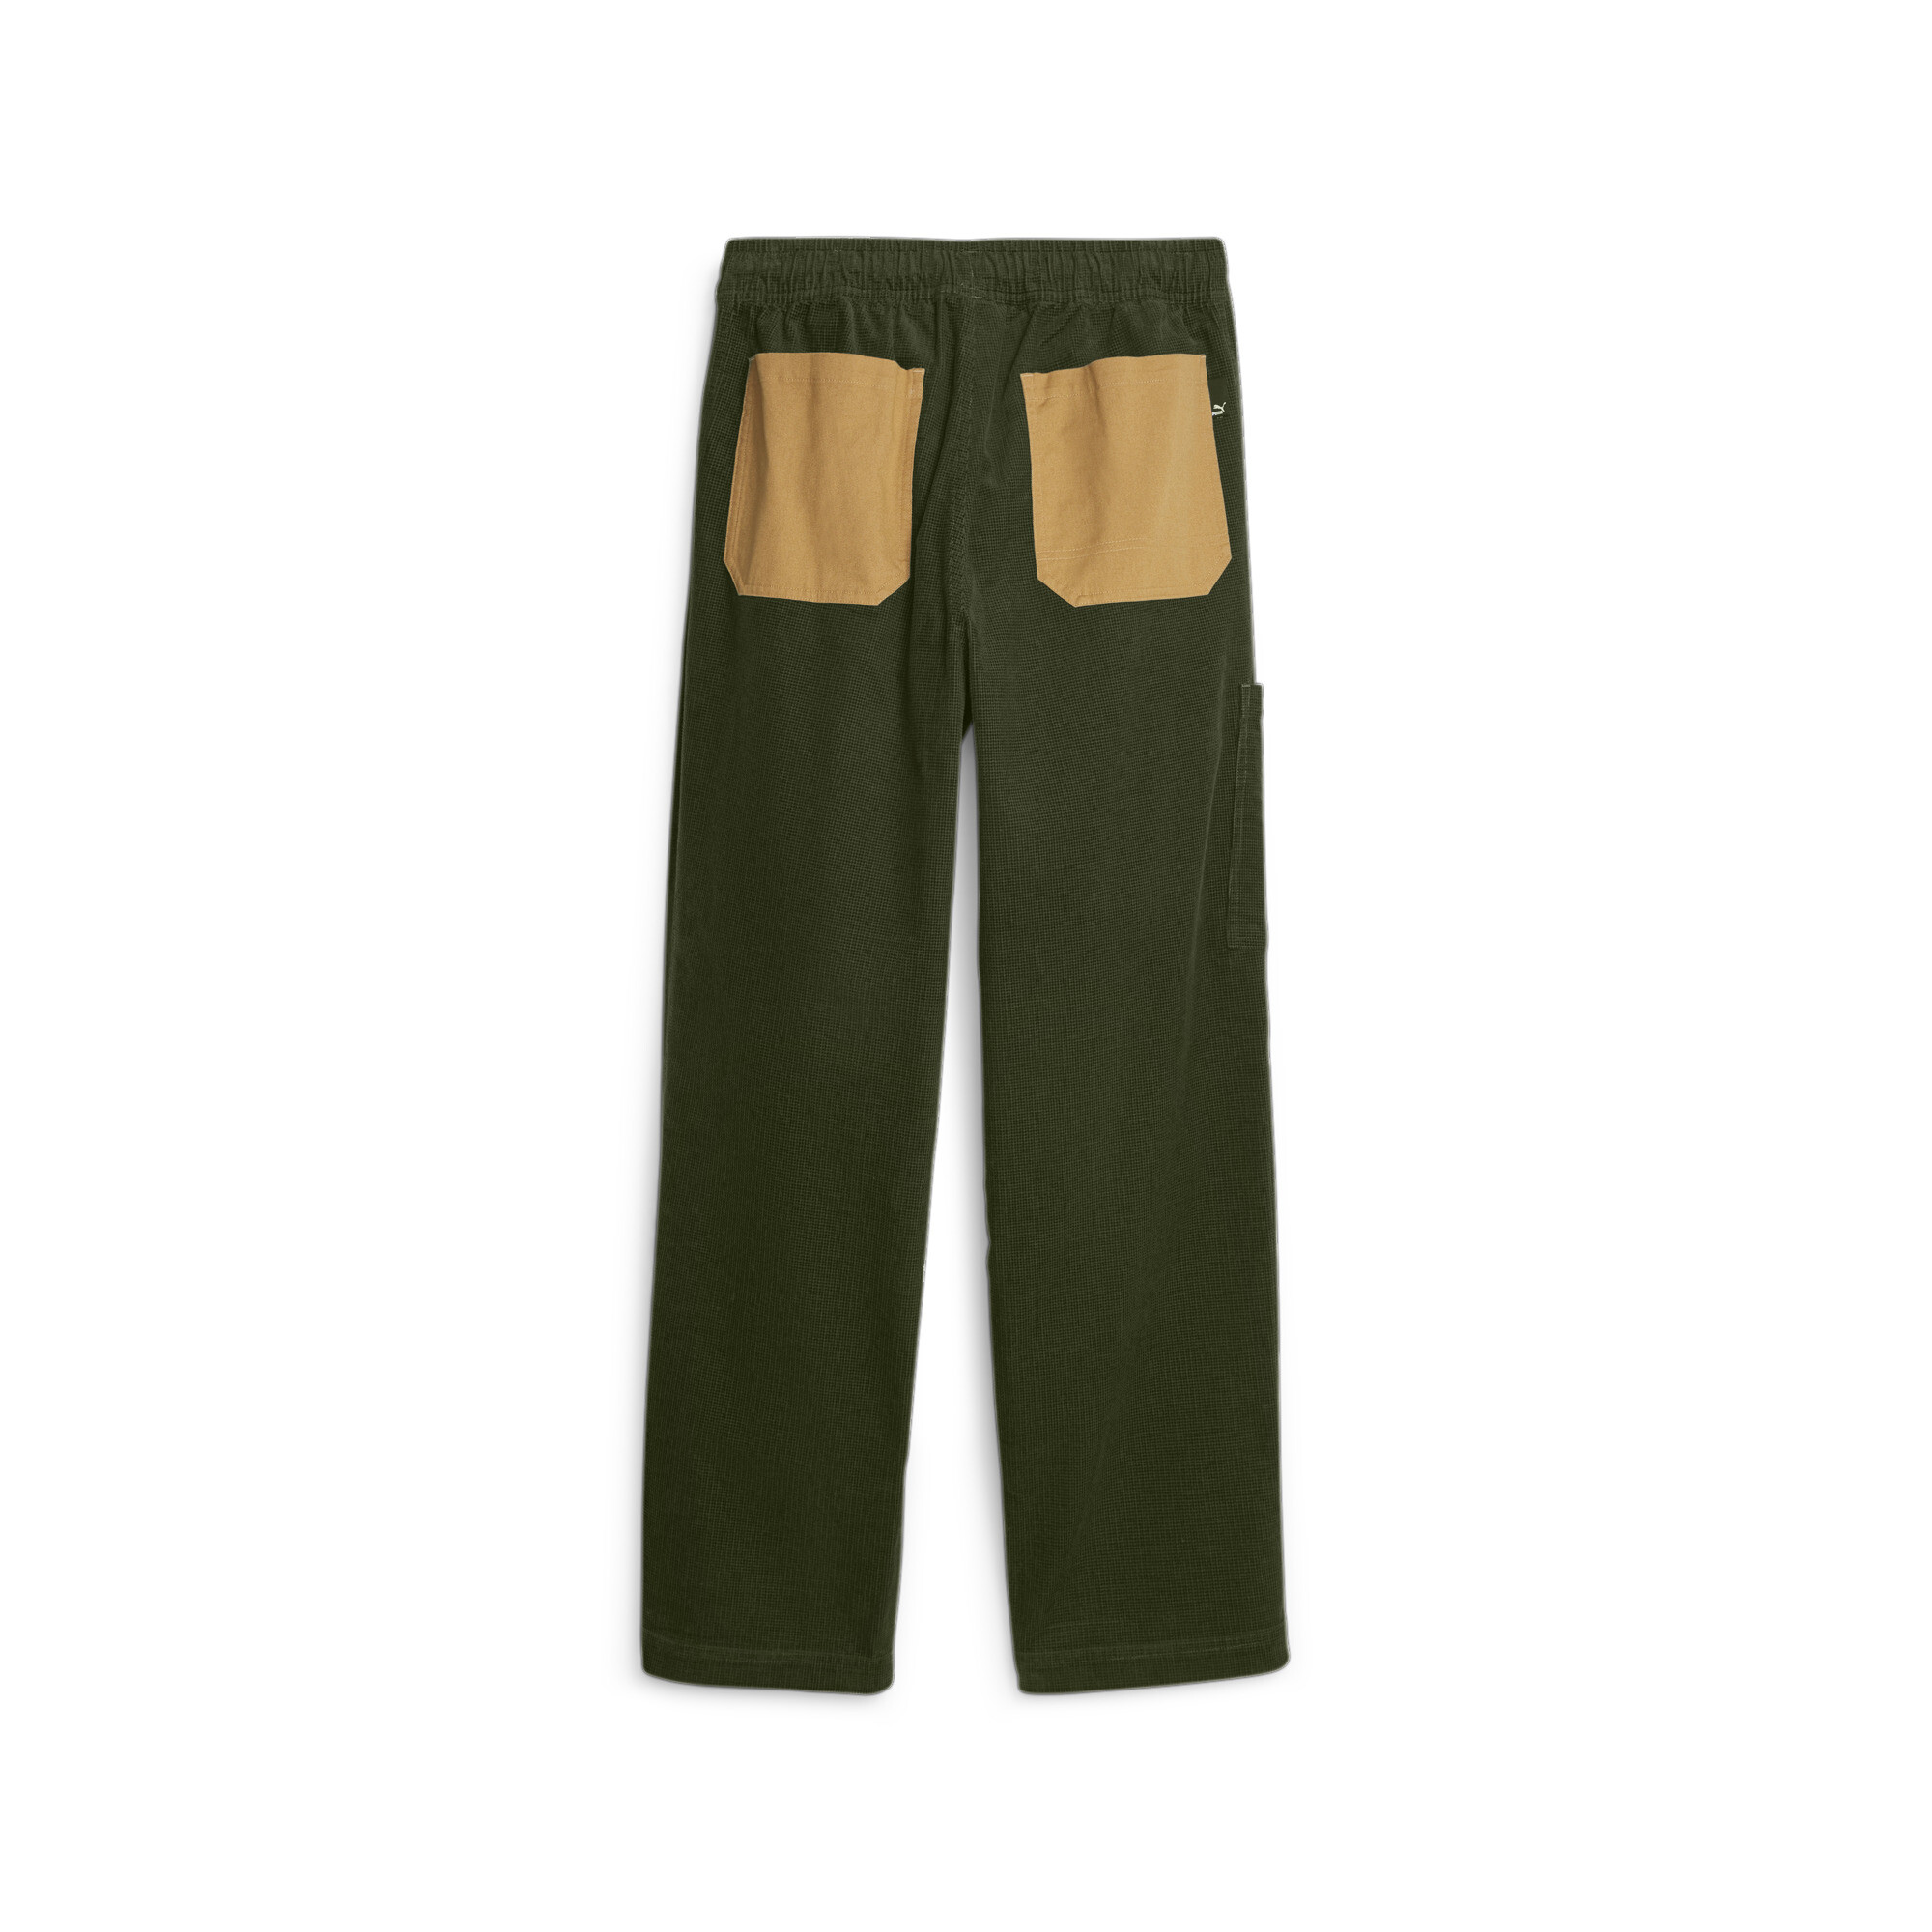 Men's PUMA Downtown Relaxed Corduroy Pants In Green, Size XS